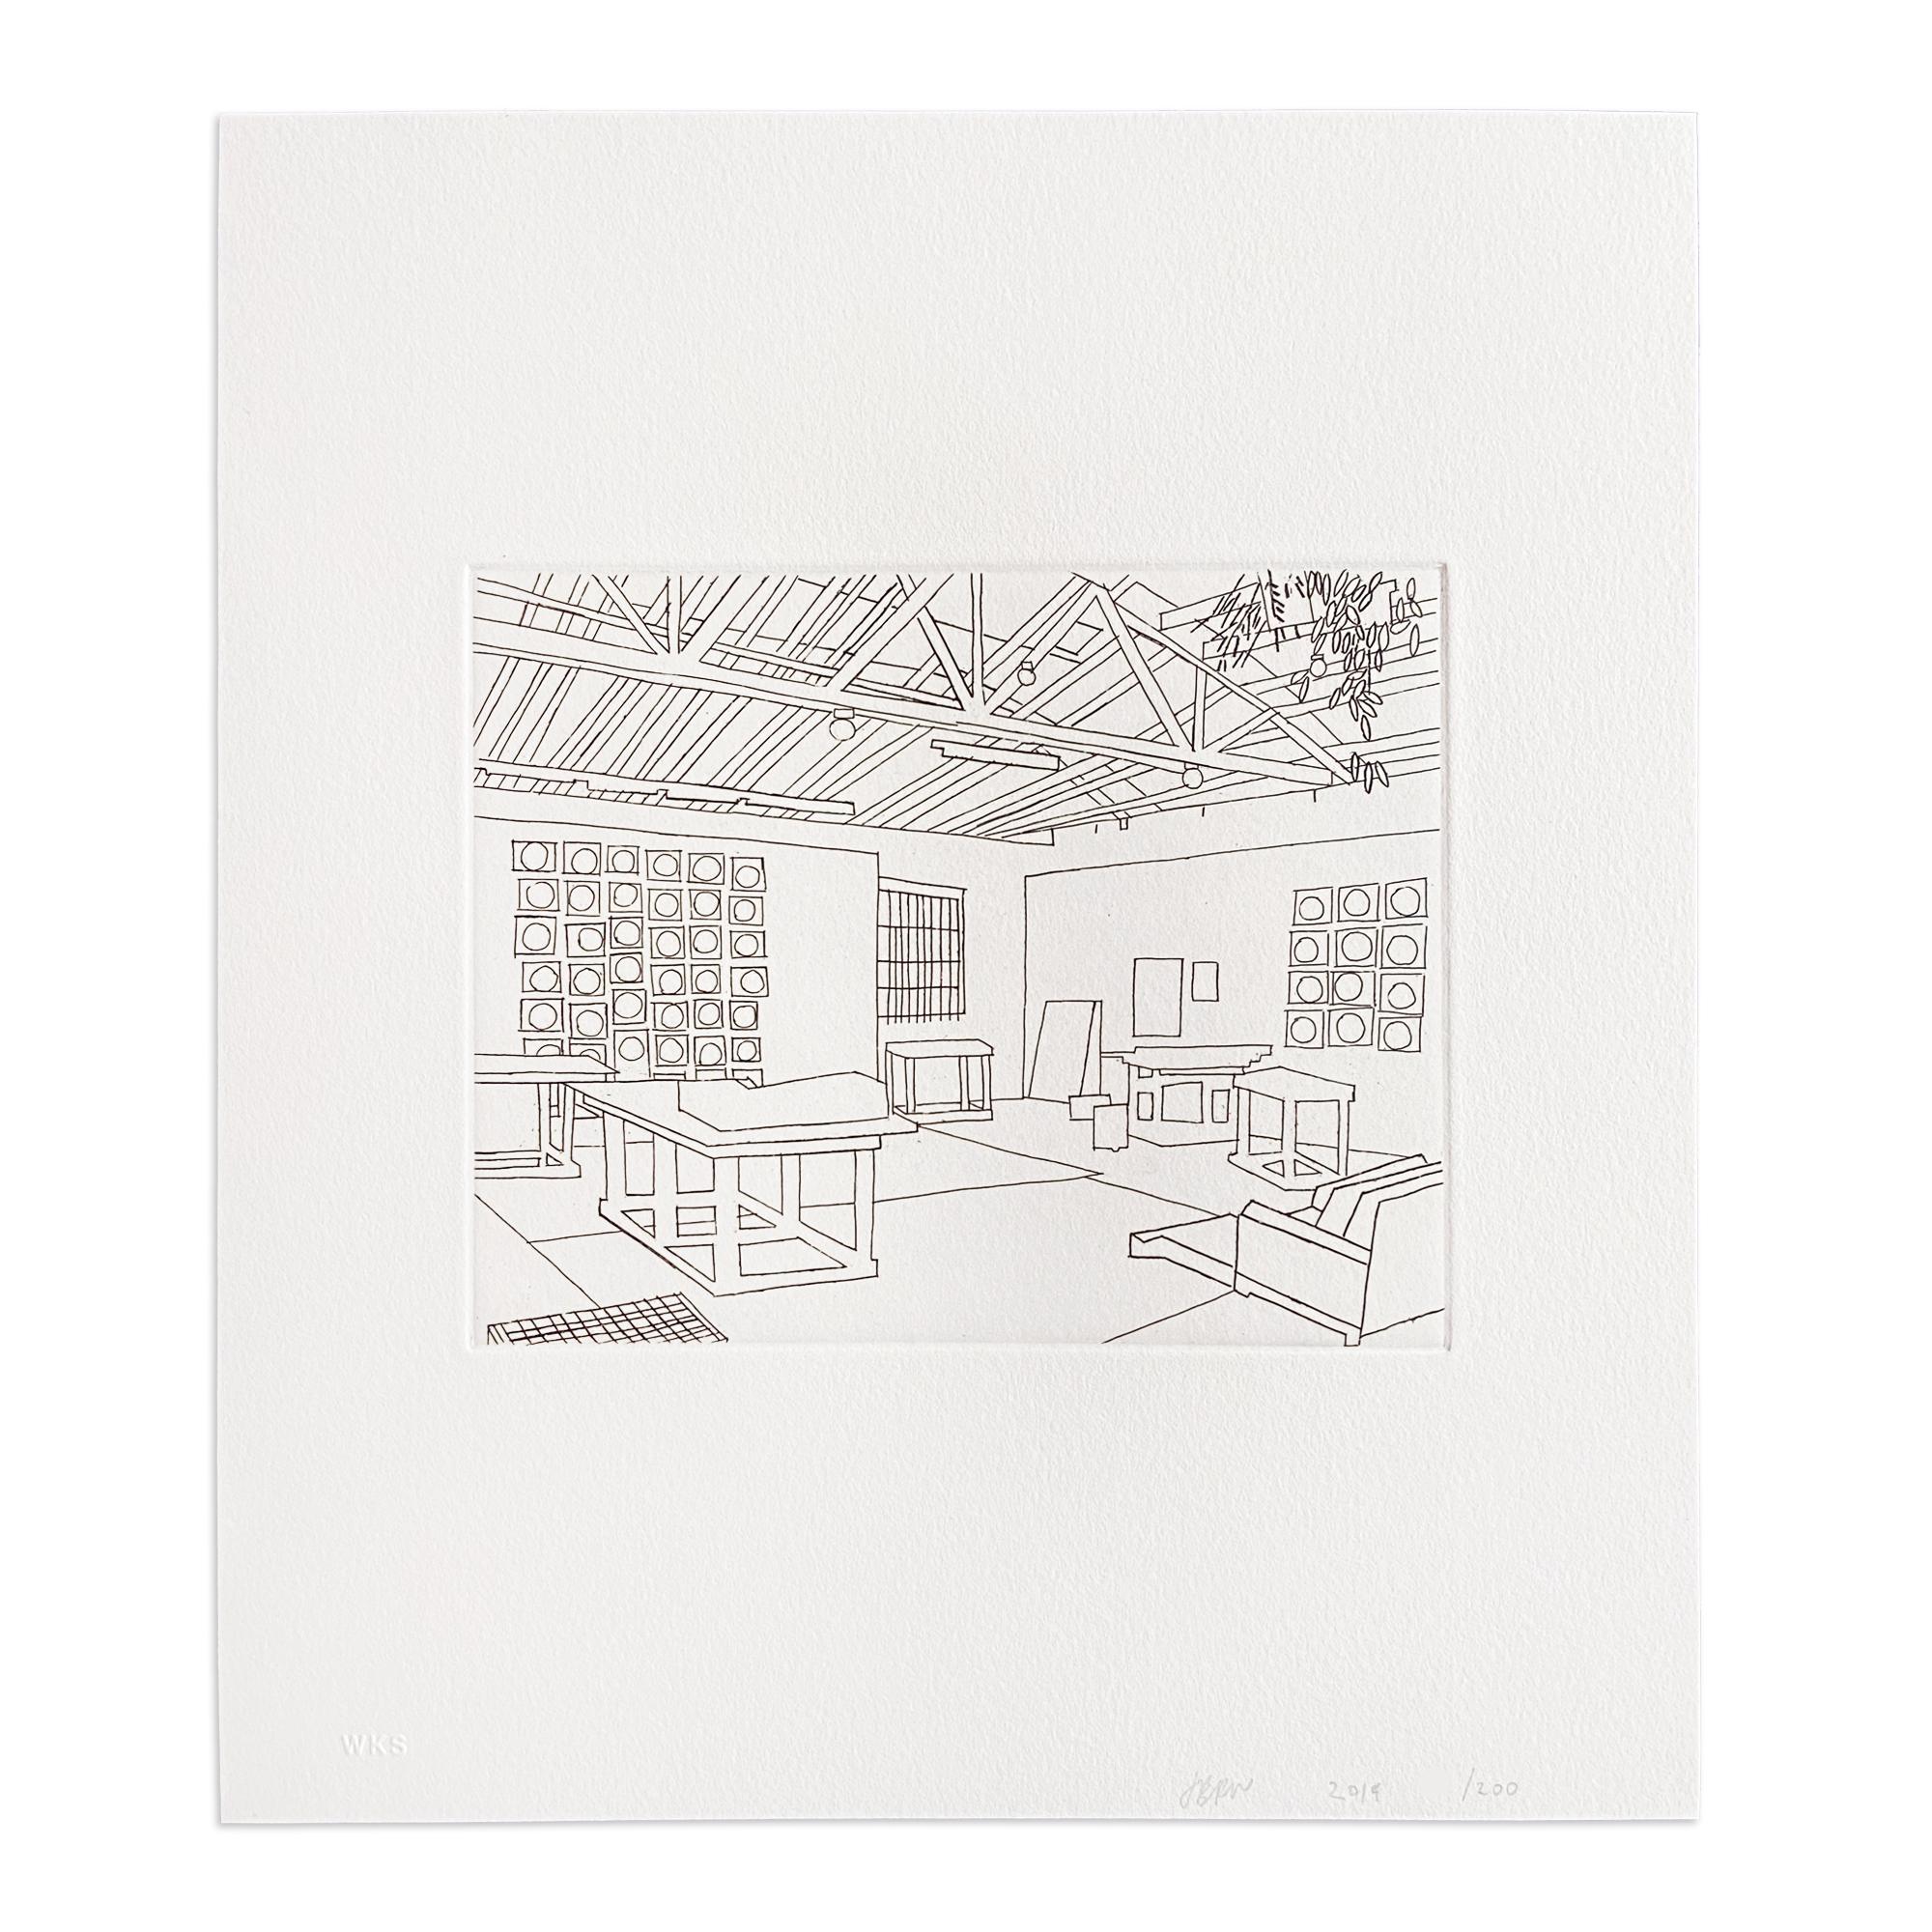 Jonas Wood, Bball Studio from 2019 depicts the studio that Wood rented from Ed Ruscha from 2007-2017. This limited edition encompasses an etching in a cardboard case, a hardback edition of his monograph, Jonas Wood, and a silk-screen limited edition